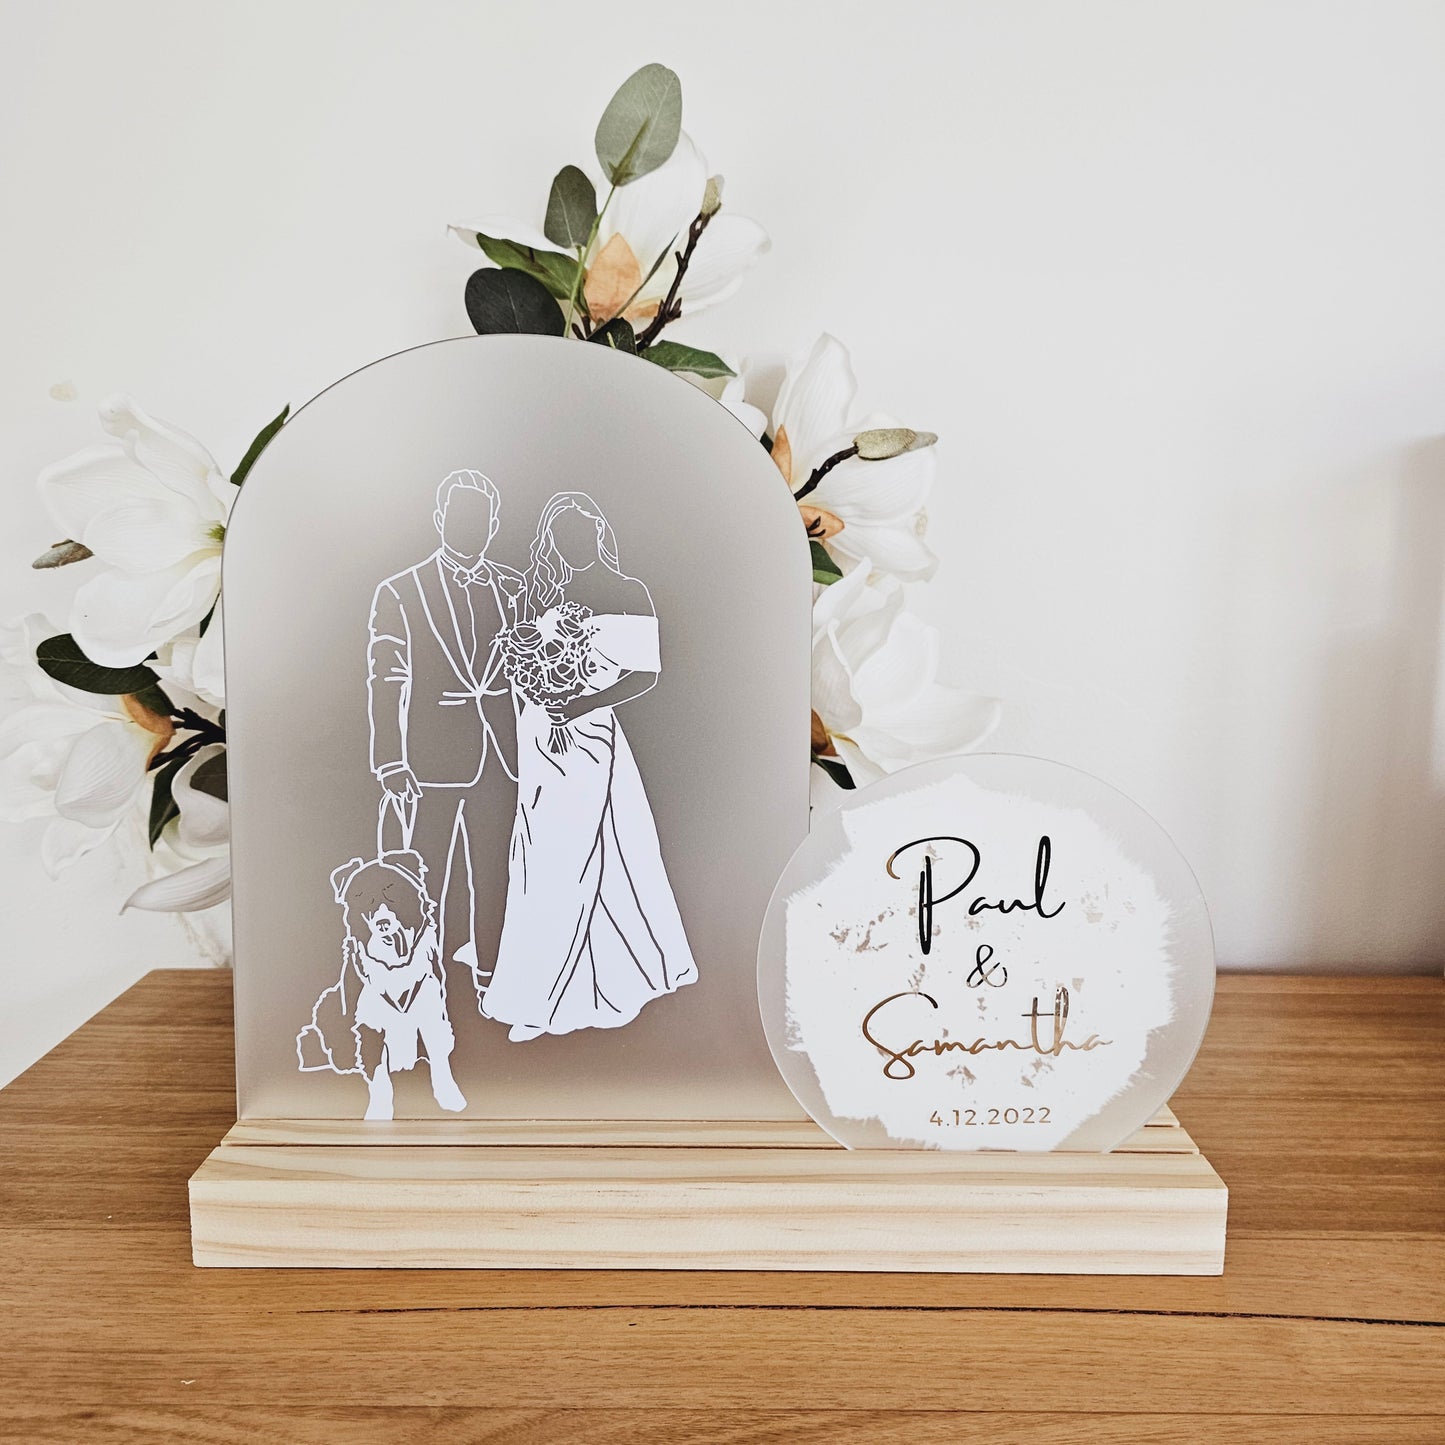 This image shows an illustration on an arch. The illustration is in white vinyl and shows a dog, a groom and a bride in a white wedding dress. The arch is sitting in a pine timber base. There is a circle acrylic shape next to it that says "Paul and Samantha" and the date 4.12.2022.